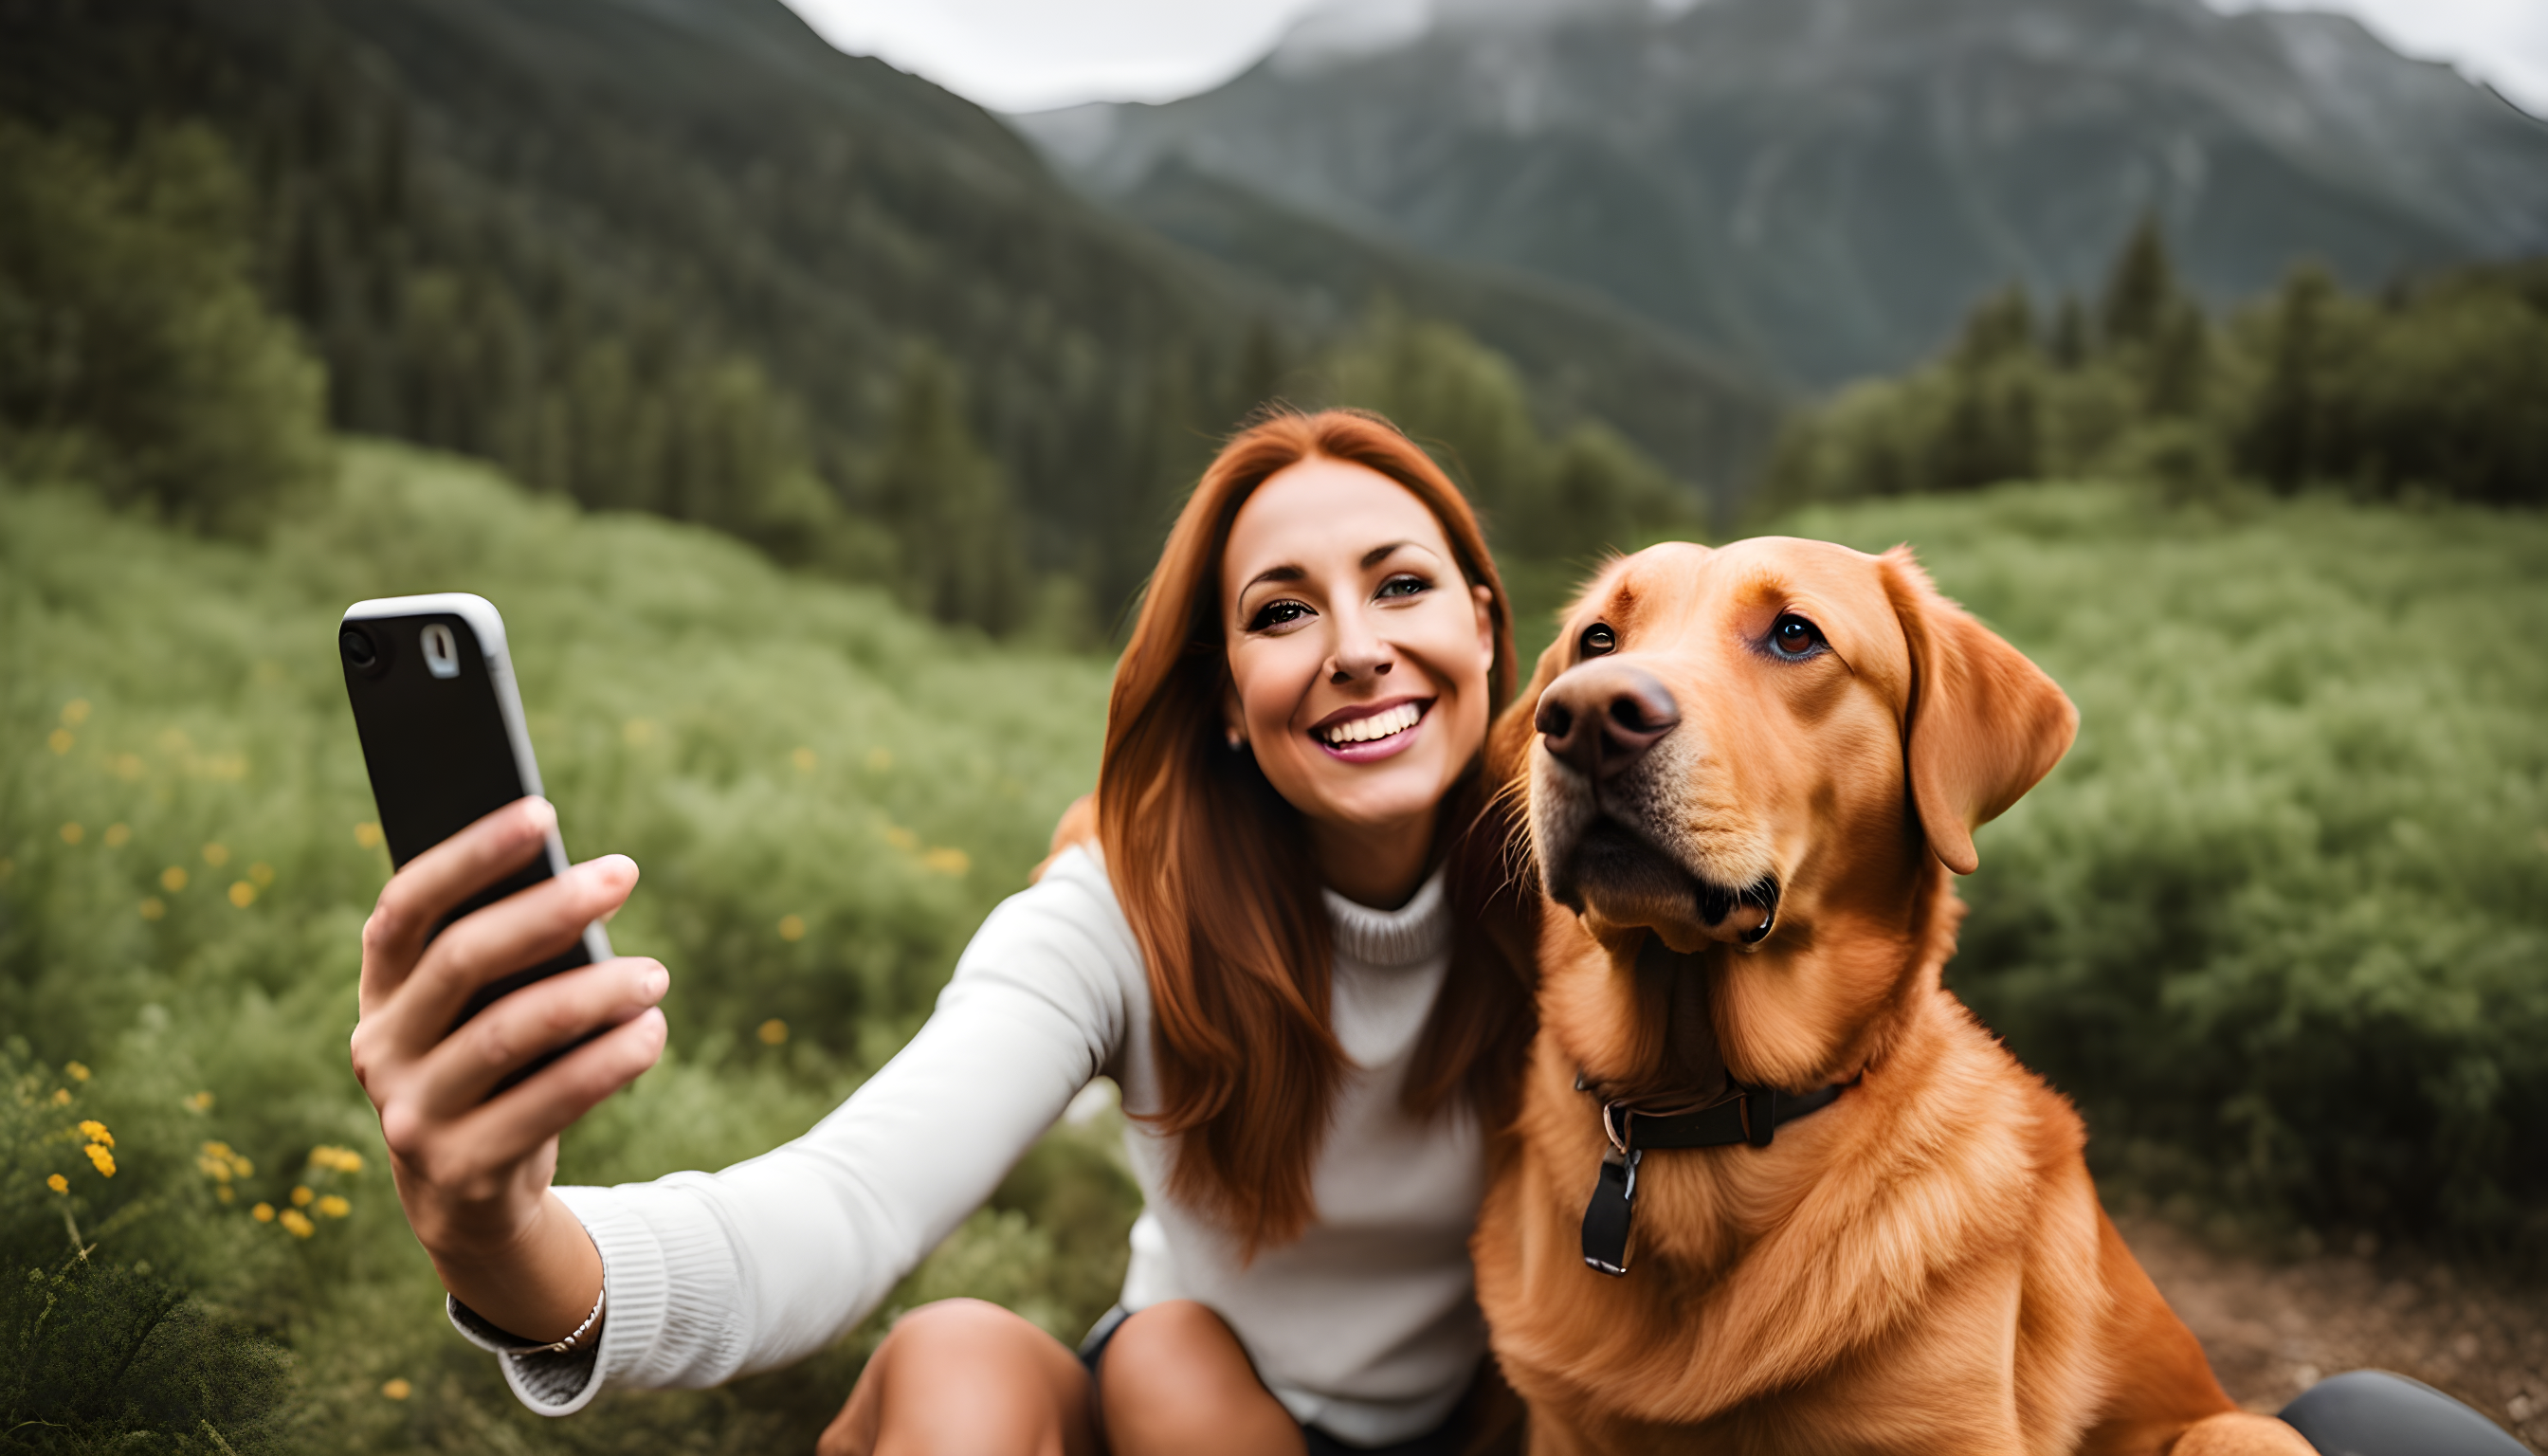 Red Lab and owner taking a selfie—The highs!